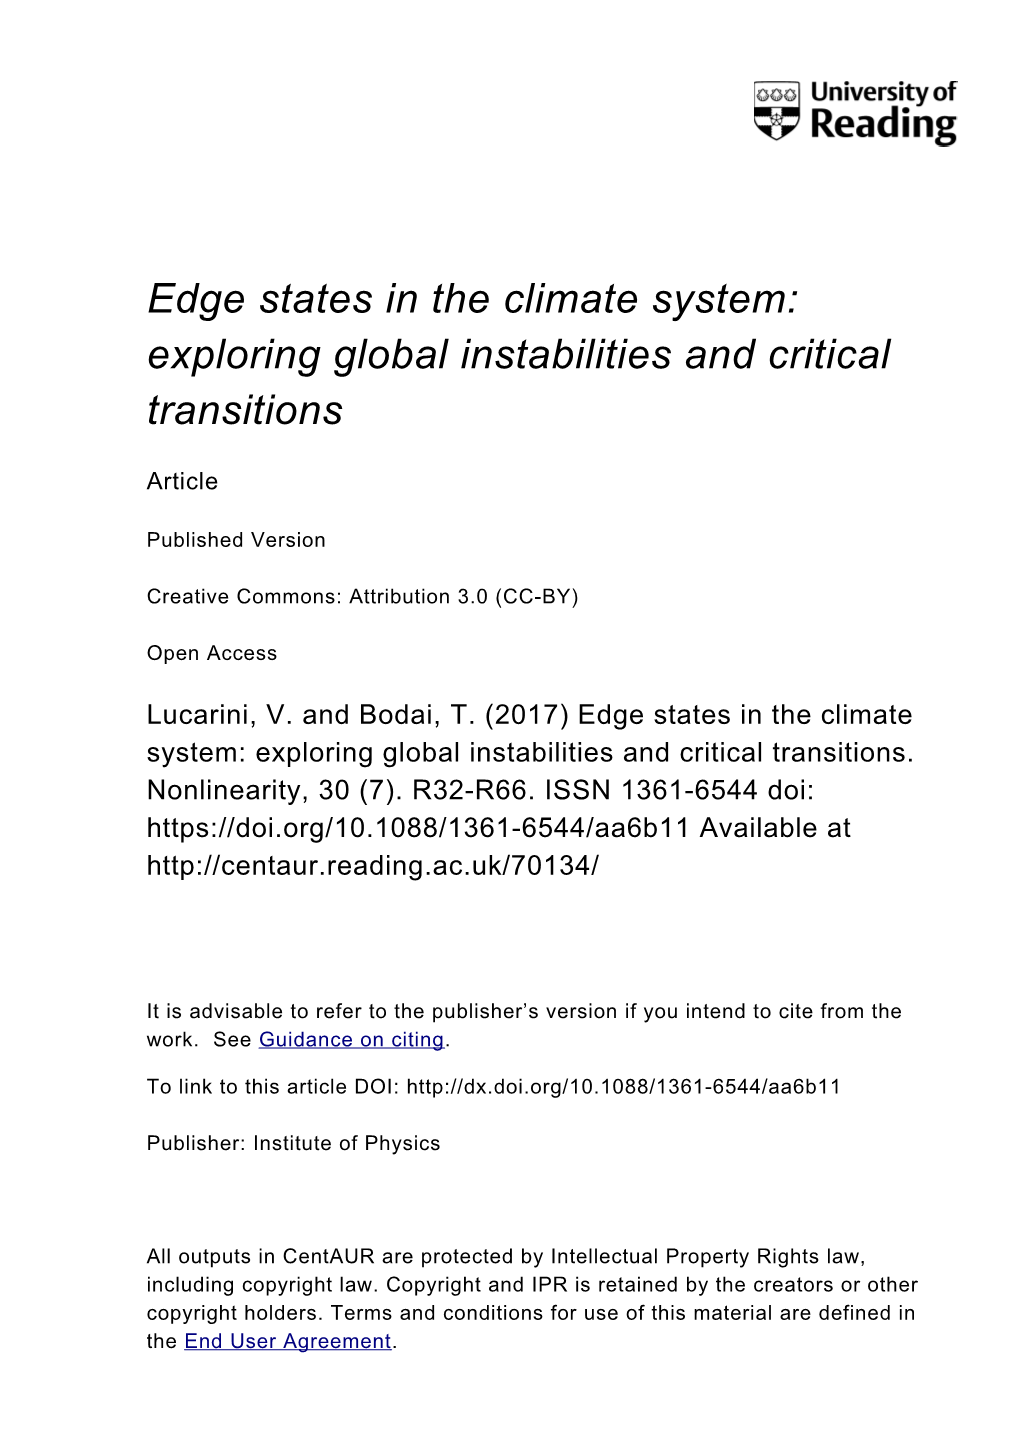 Edge States in the Climate System: Exploring Global Instabilities and Critical Transitions